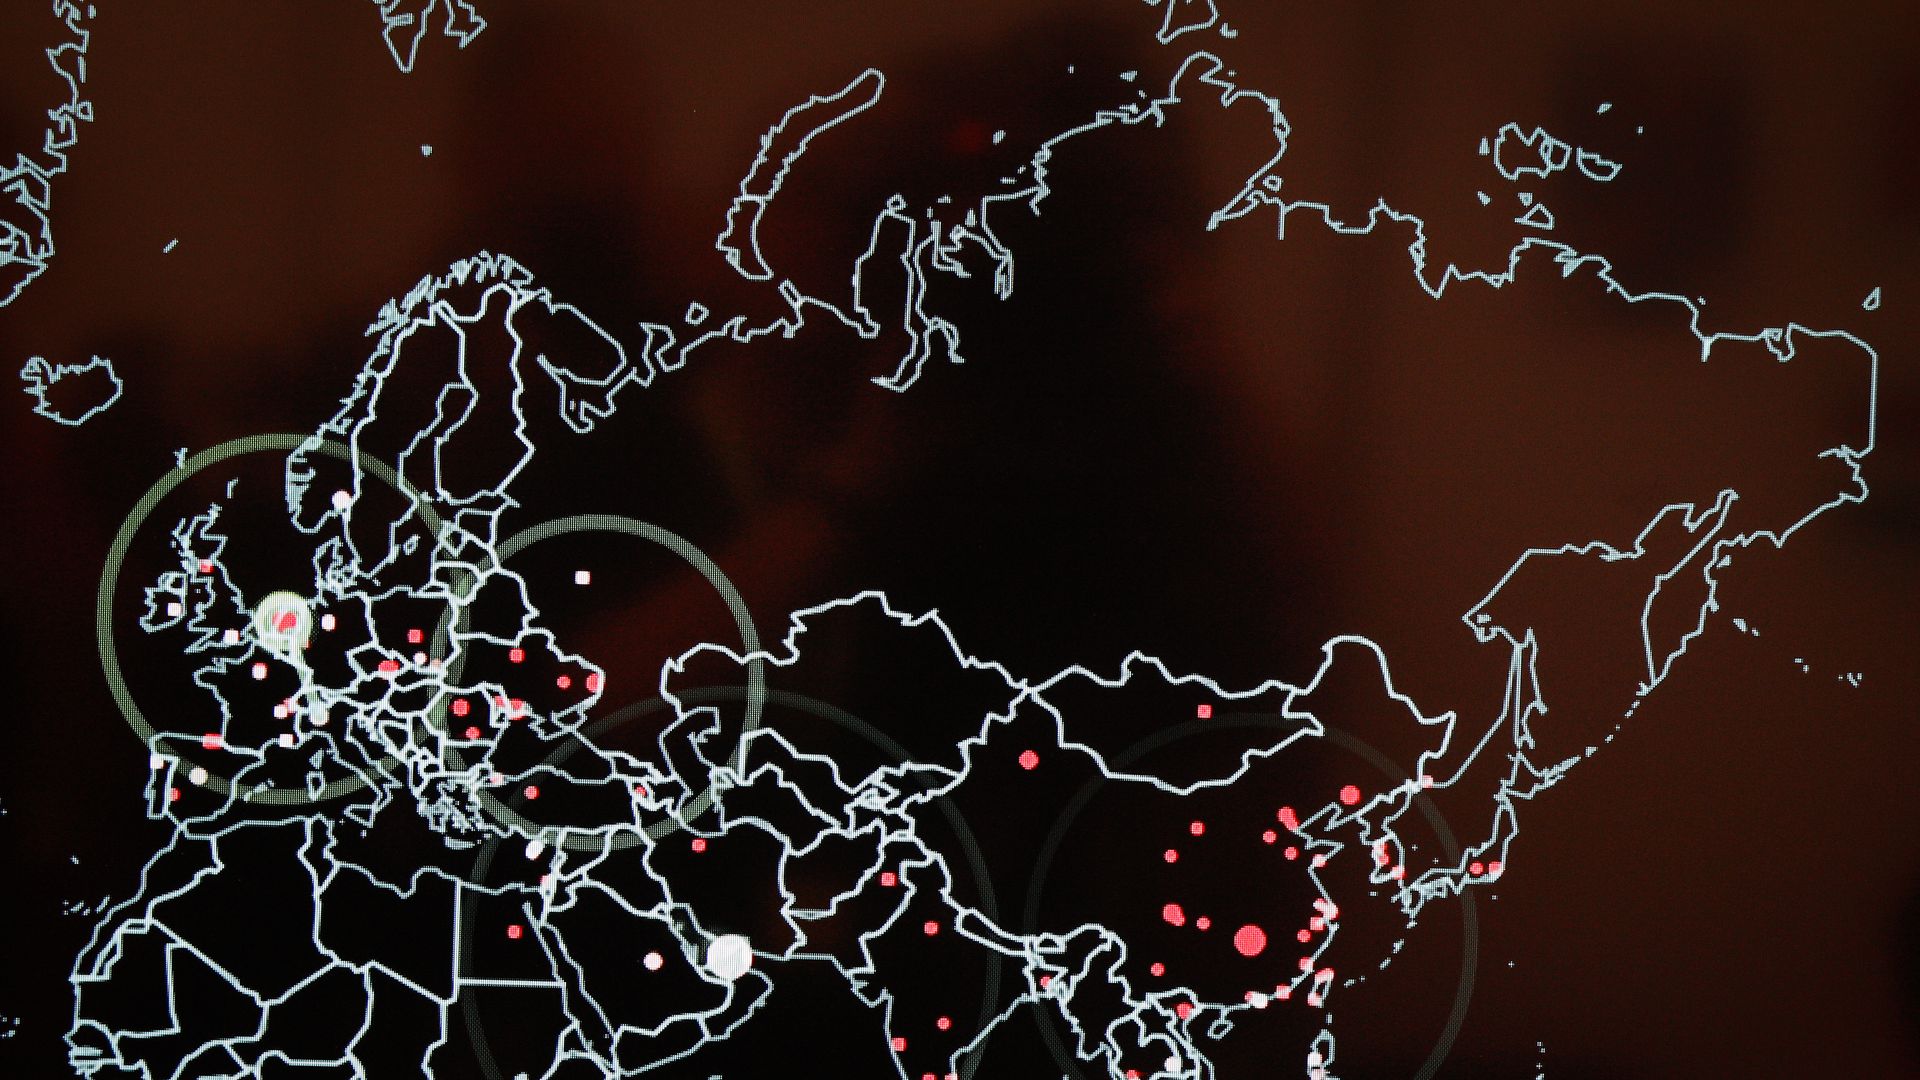 Map showing red pinpoints at certain cities around the world